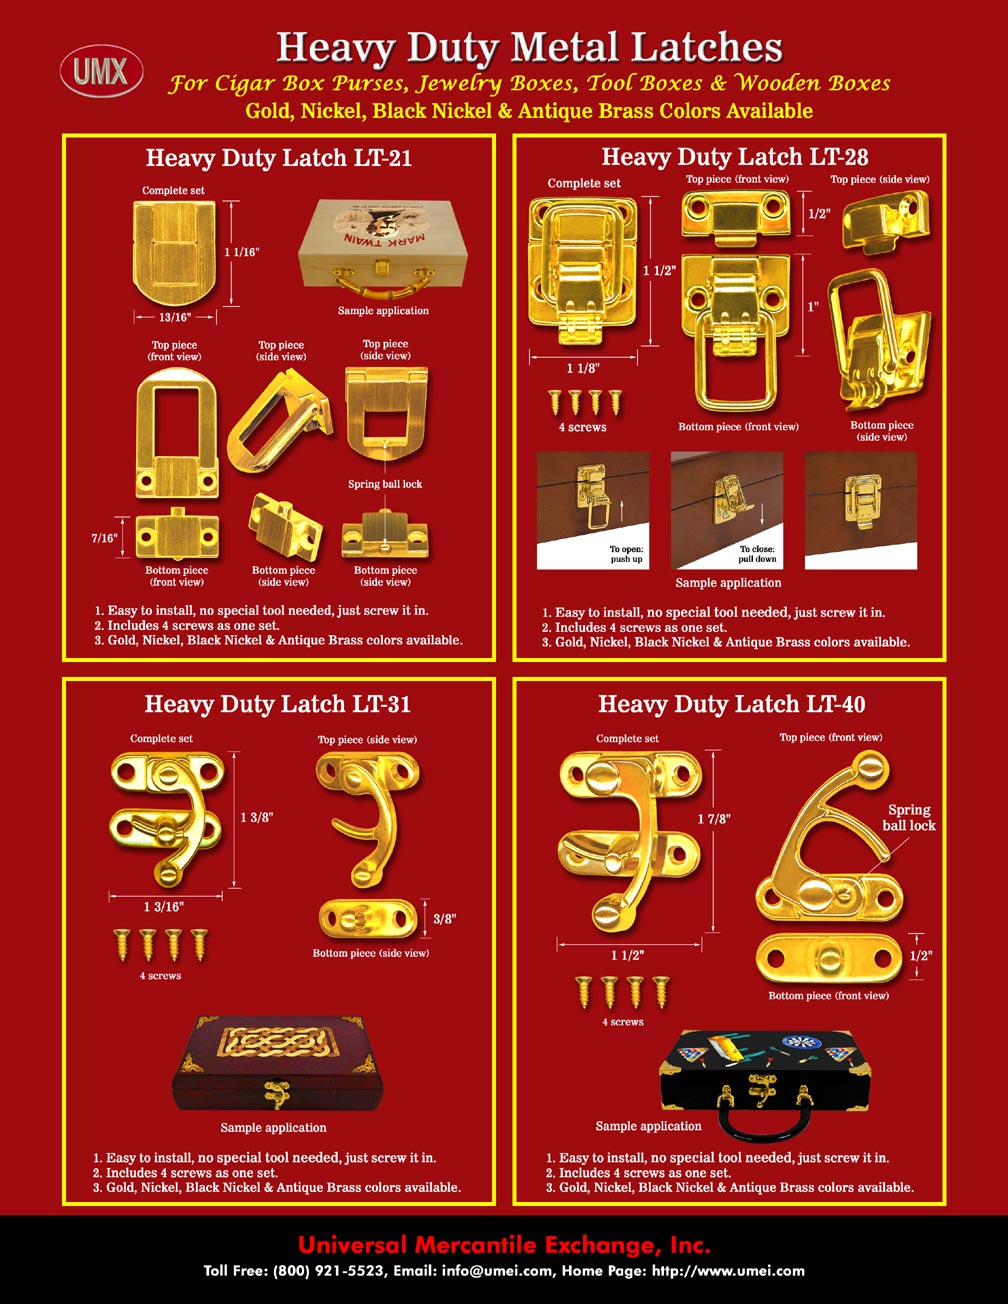 We are manufacturer and designer of cigar box craft latch and wooden jewelry box craft latches with latch knobs. The latch knob will help you to open or close box cover easily.